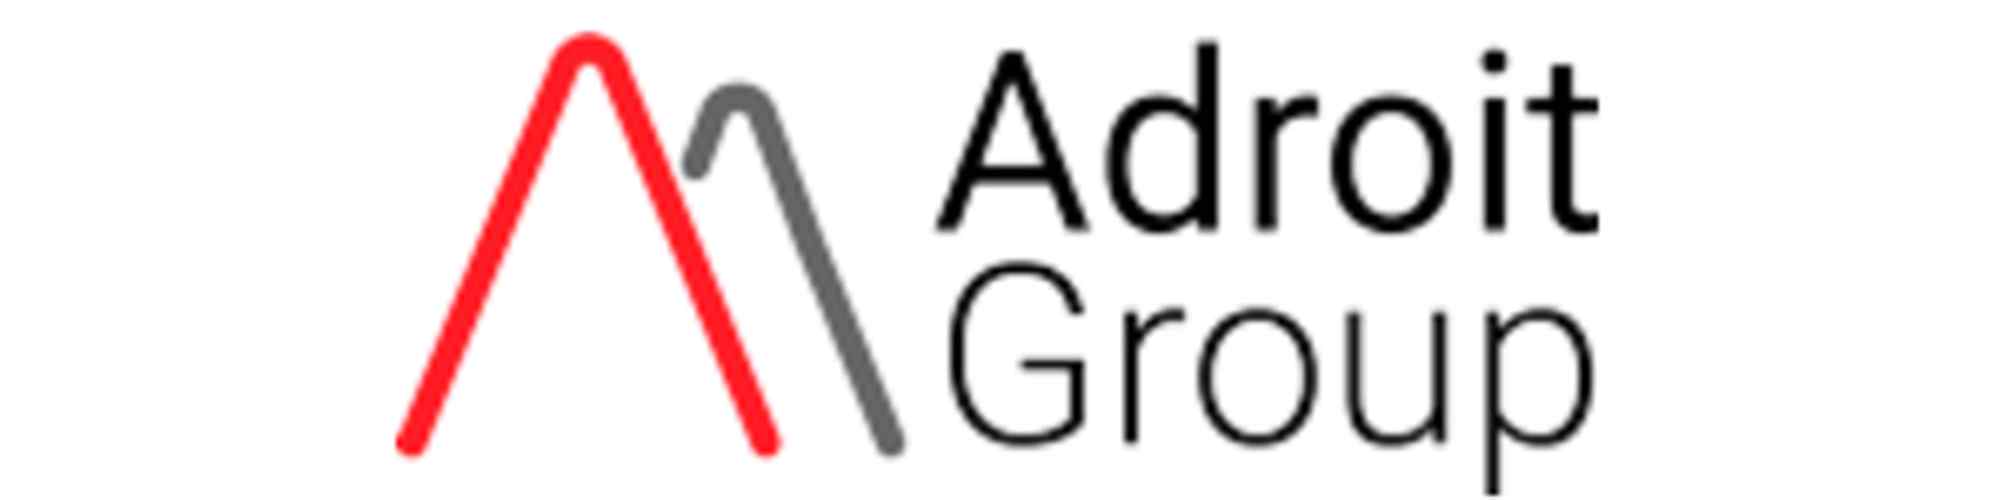 adroit group